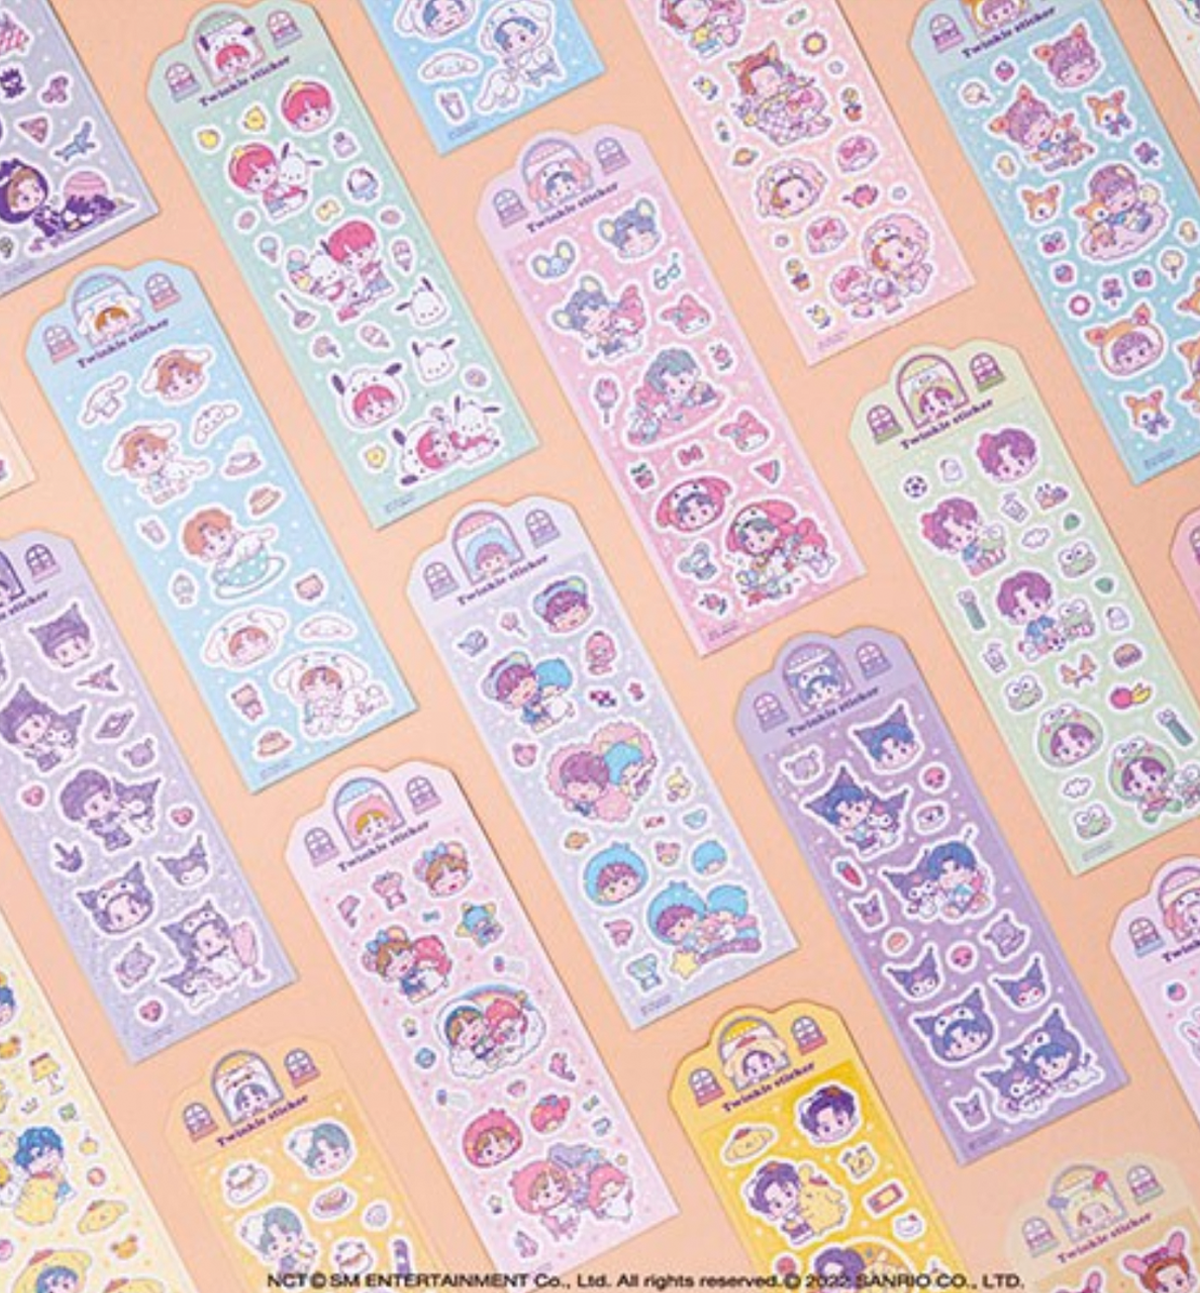 12 Sheets Kpop Photocard Korean Stickers, Colorful Heart Star Bubble Style  Glitter Scrapbook Stickers Self Adhesive Decorative Deco Sticker for Water